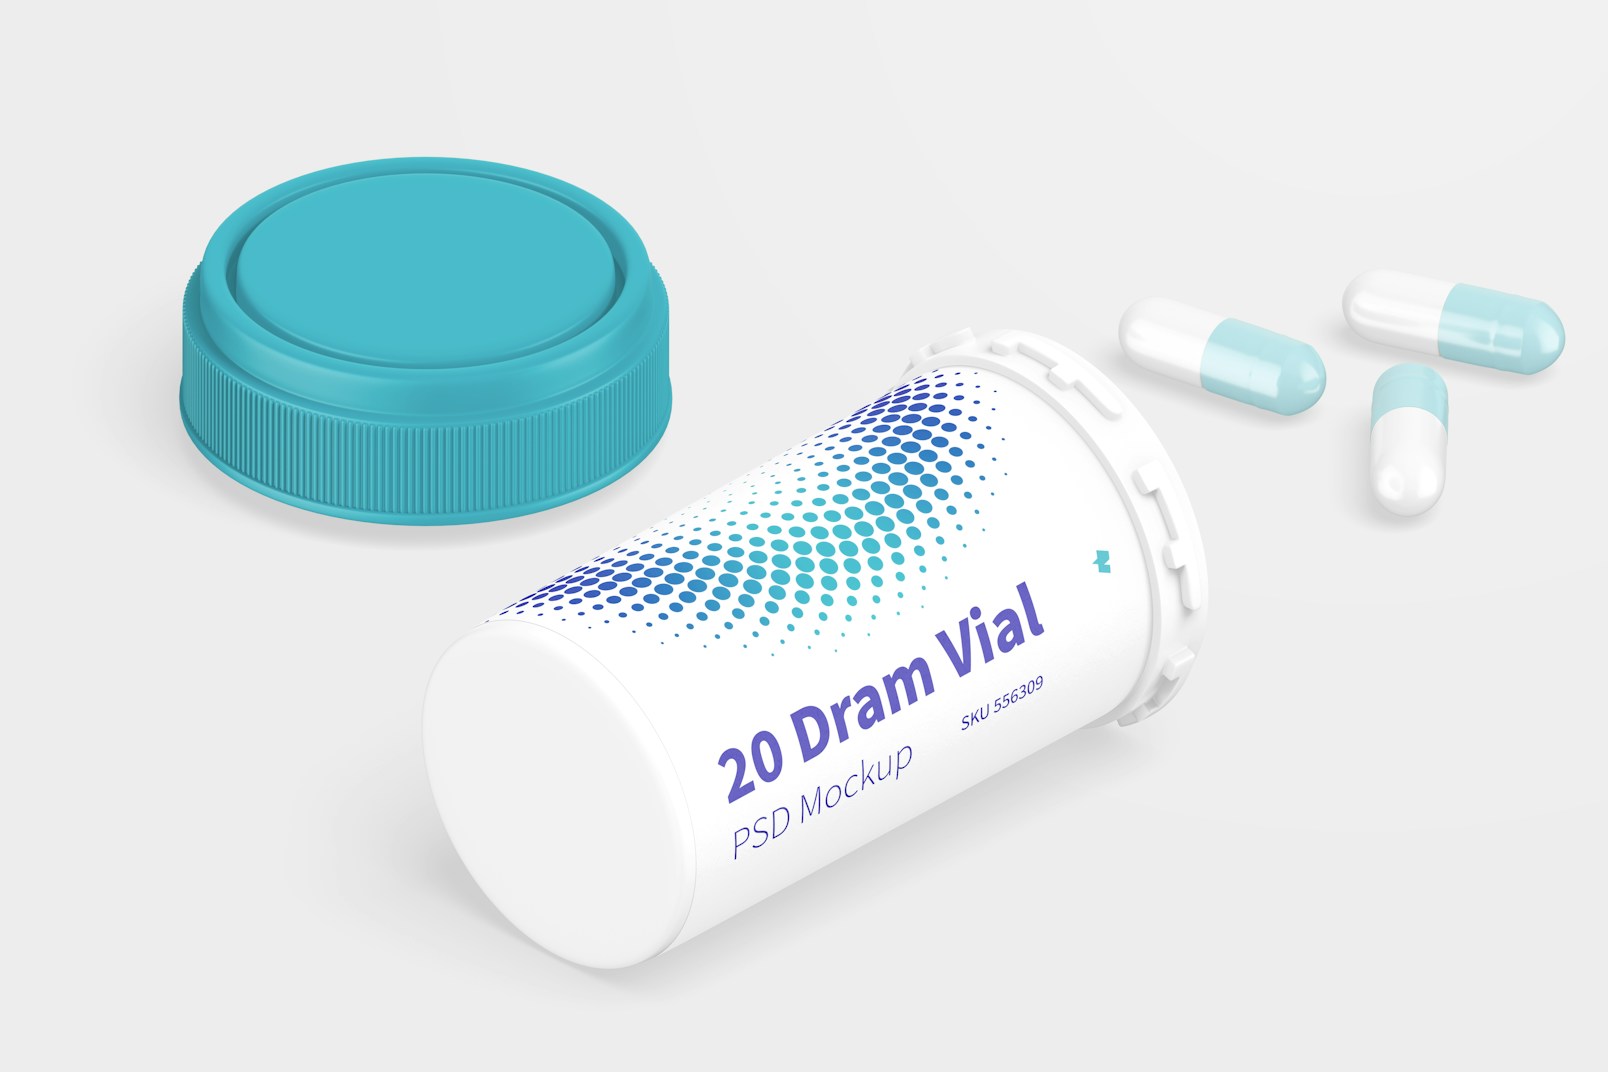 20 Dram Vial with Reversible Cap Mockup, Isometric Opened View